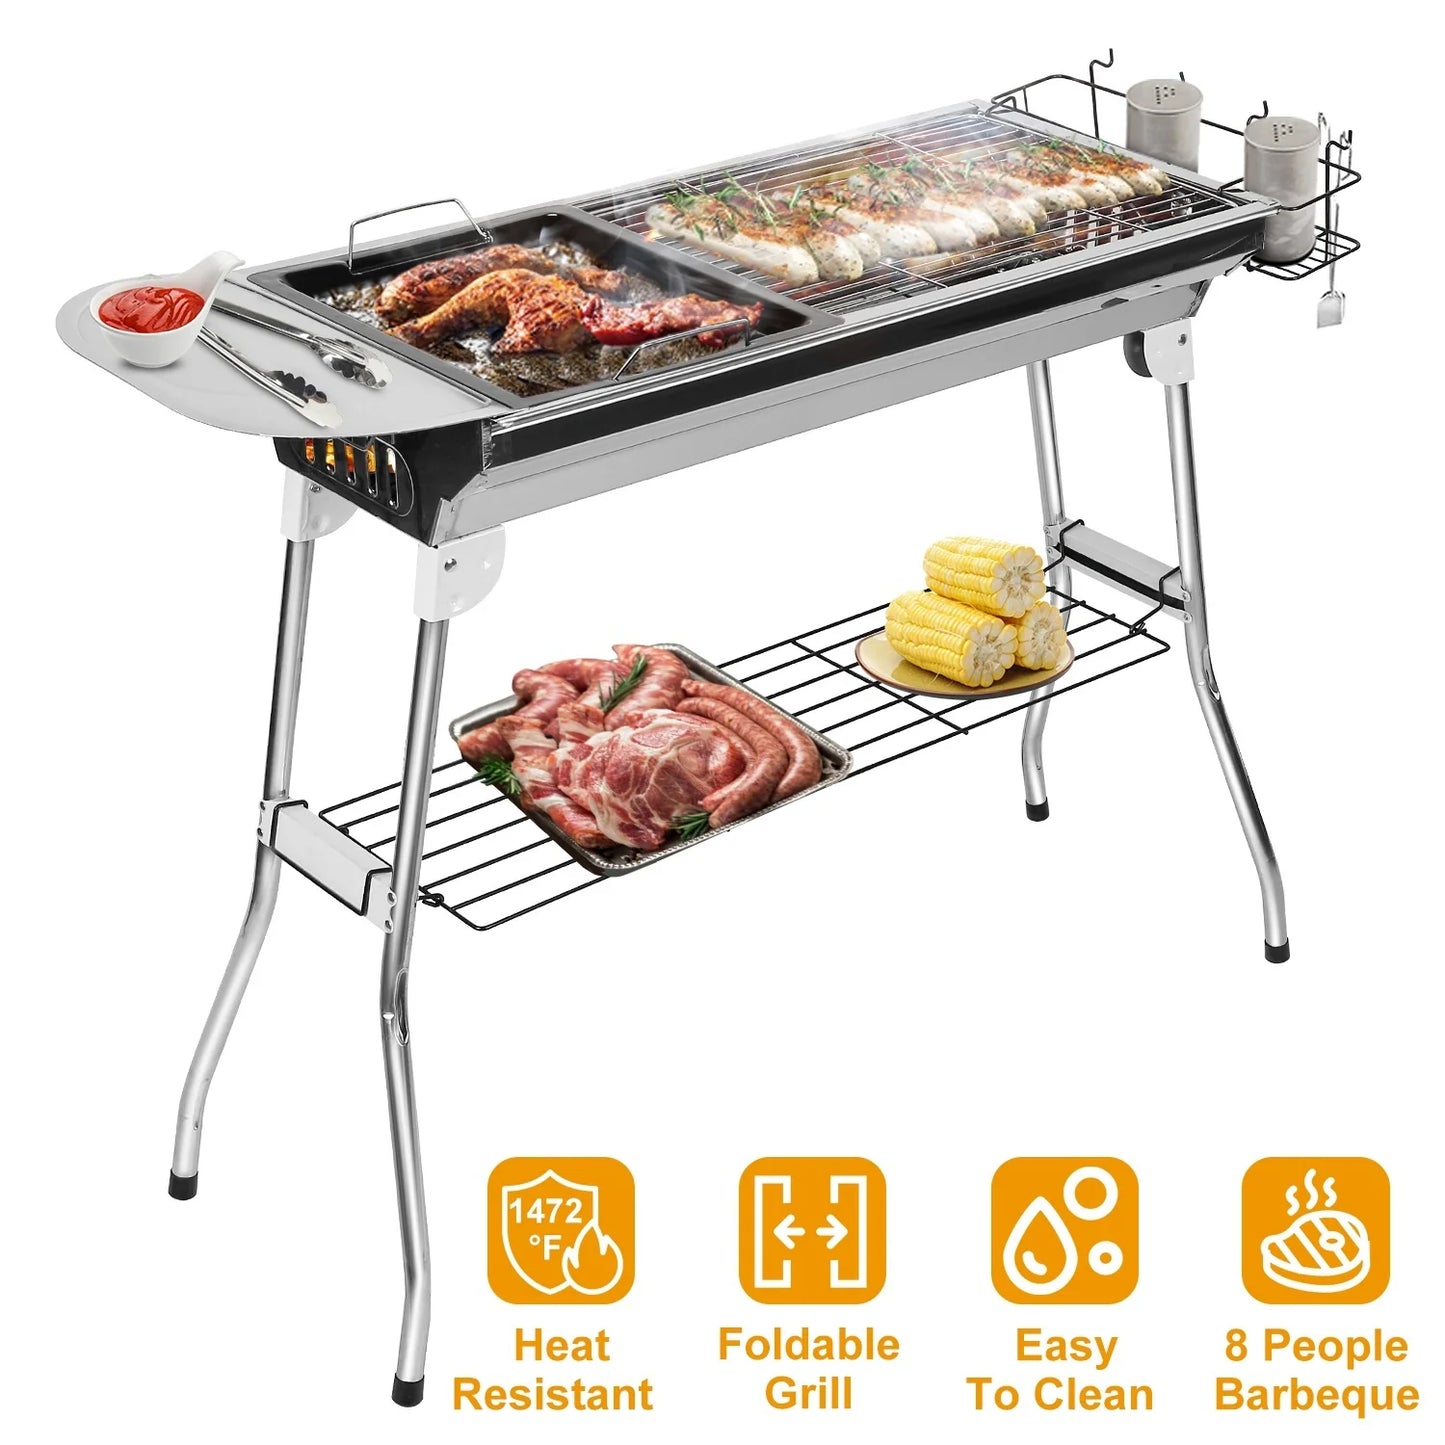 Portable BBQ Grill - Outdoor Charcoal Barbeque Grills | Stainless Steel Camping Grill For Picnic